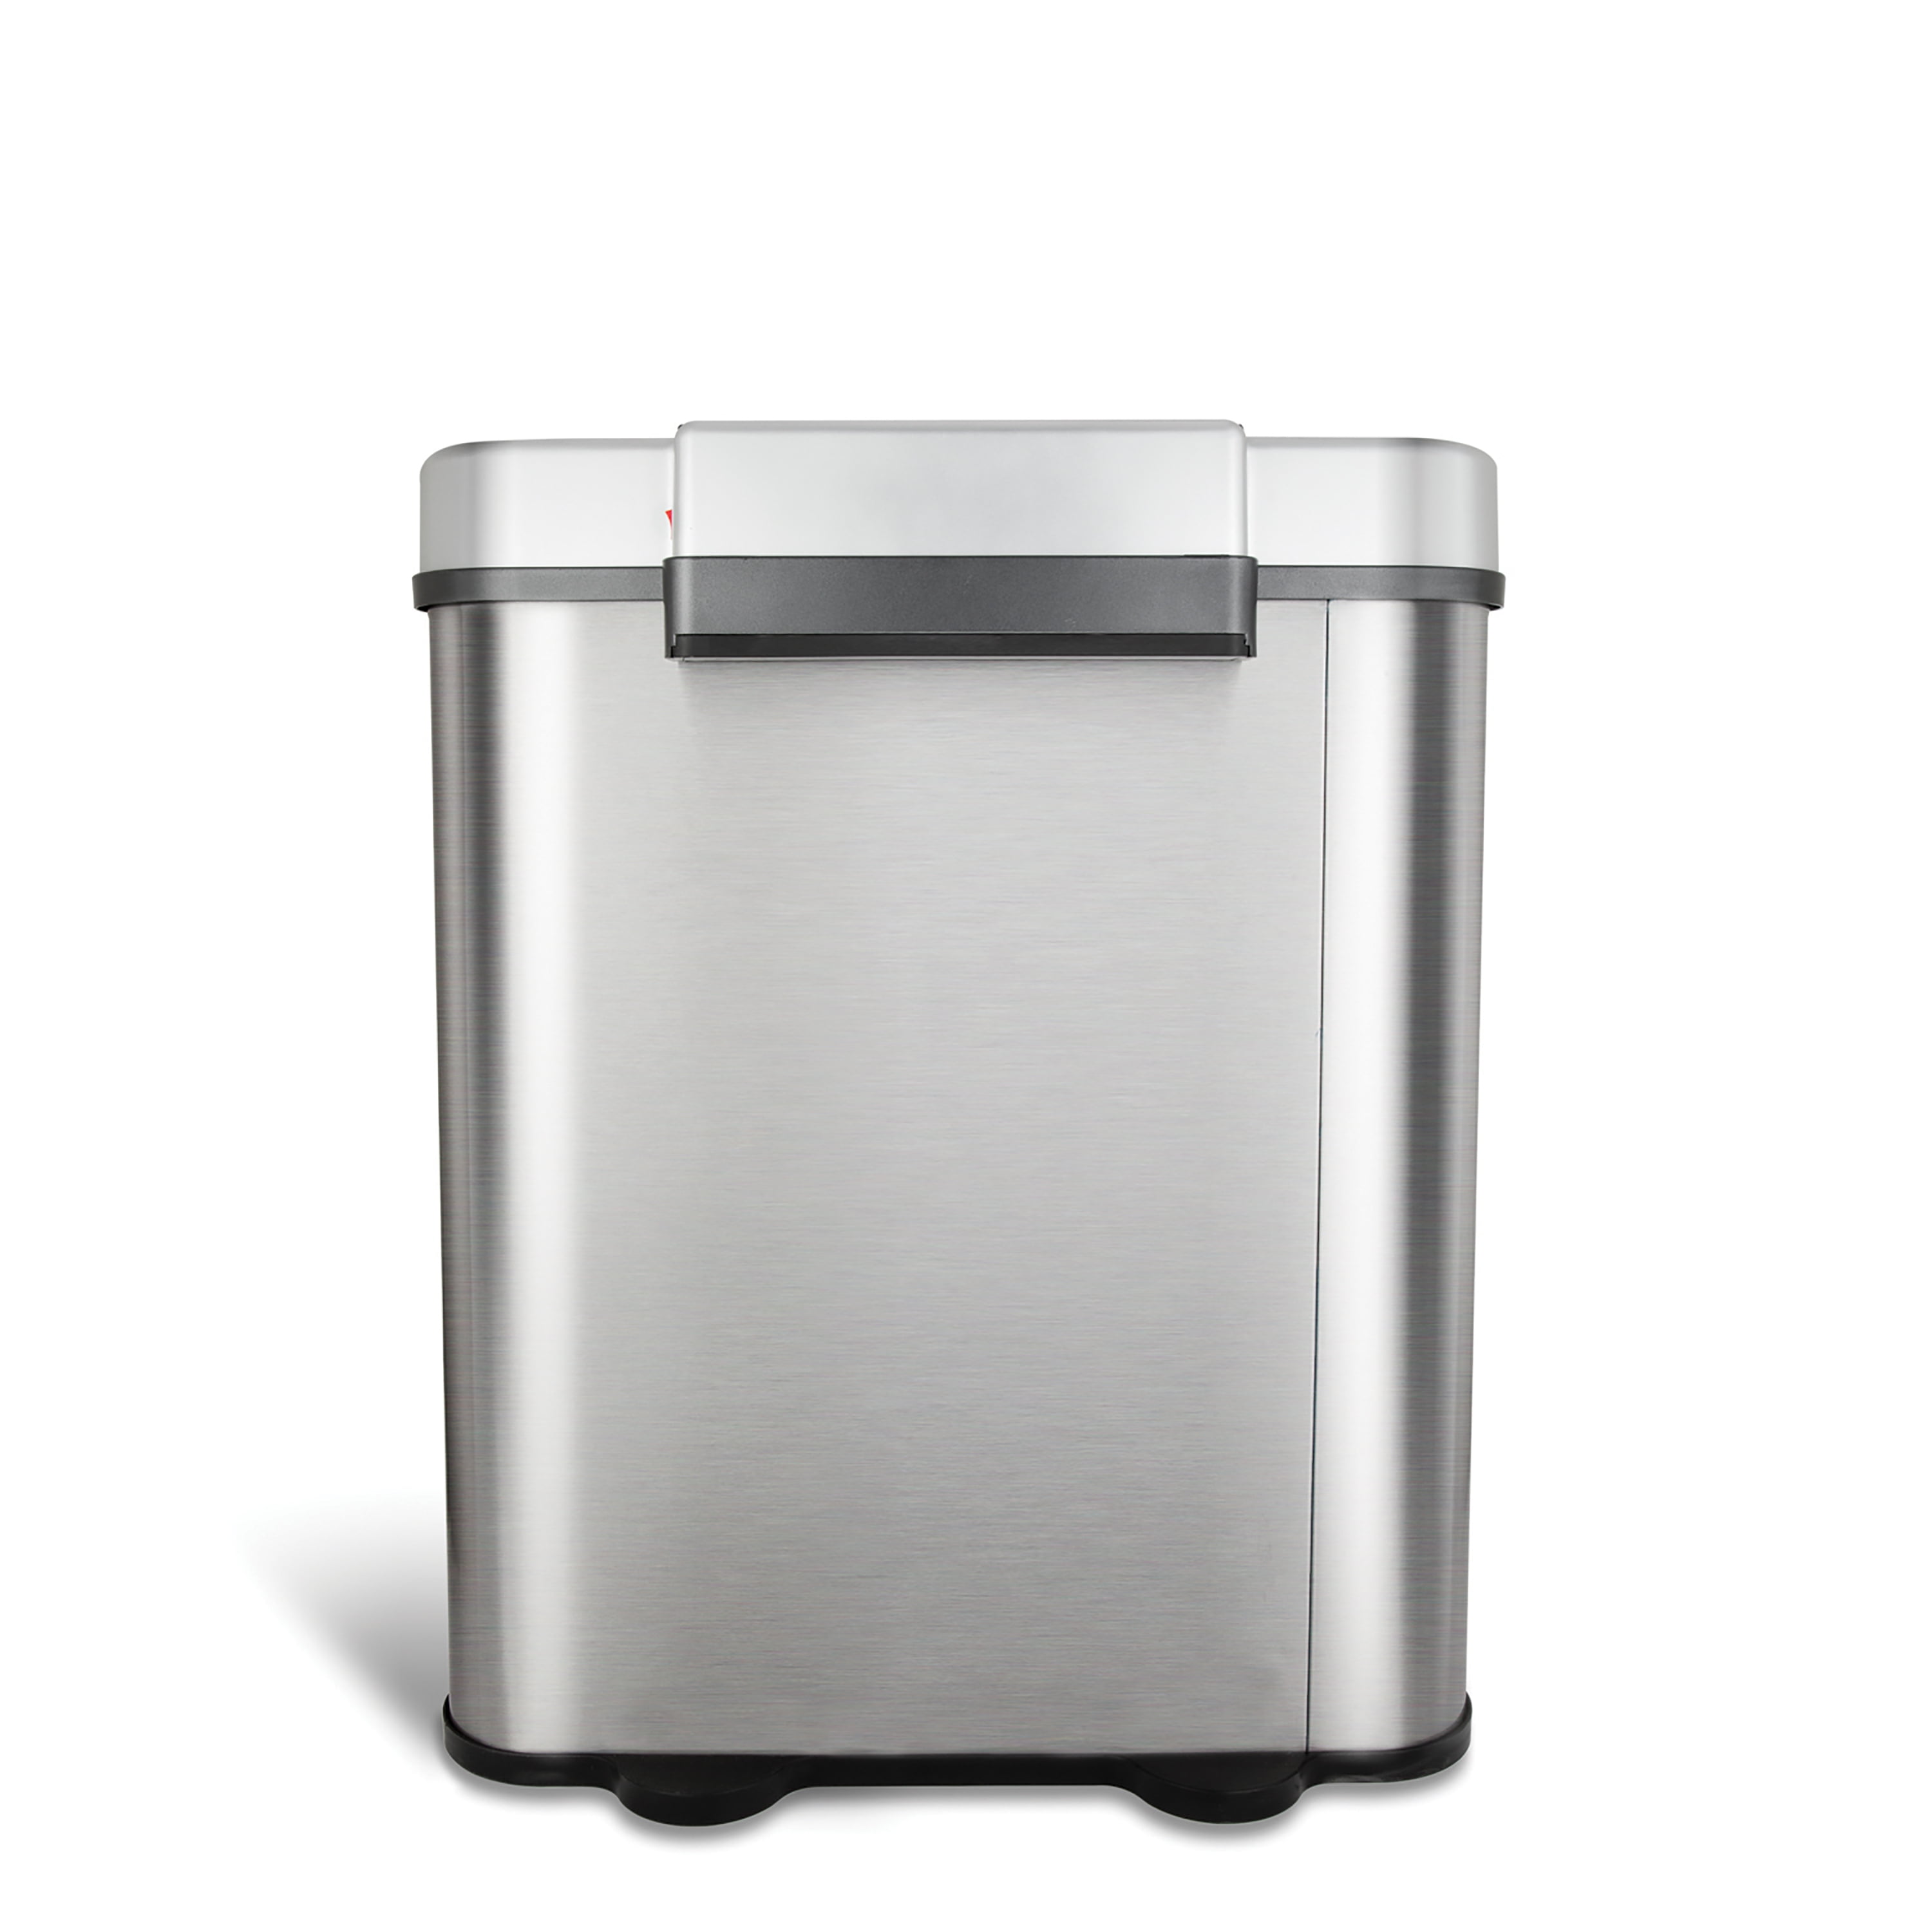 AWENN - Dual Kitchen Garbage Trash Can with Lid and Pedal (7.9 Gallon – 30 Liters) - Touchless Round Shape Waste Bin - Stainless Steel Dustbin for